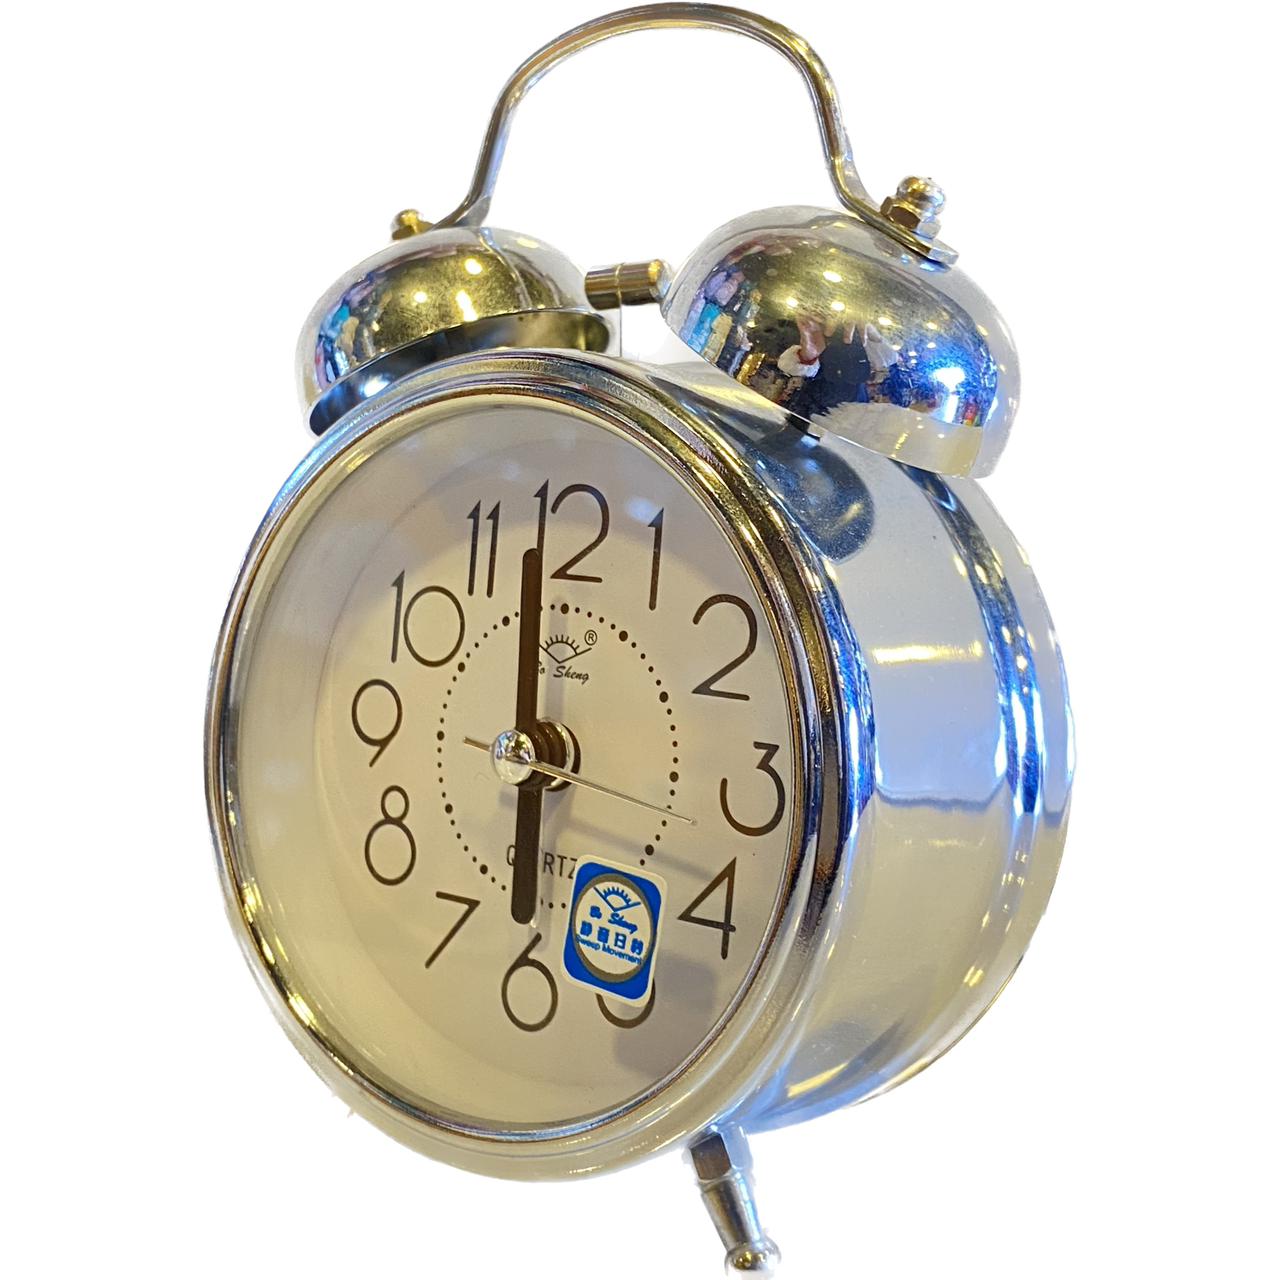 Metallic 3 Inch Alarm Analogue Clock  with Twin Bell